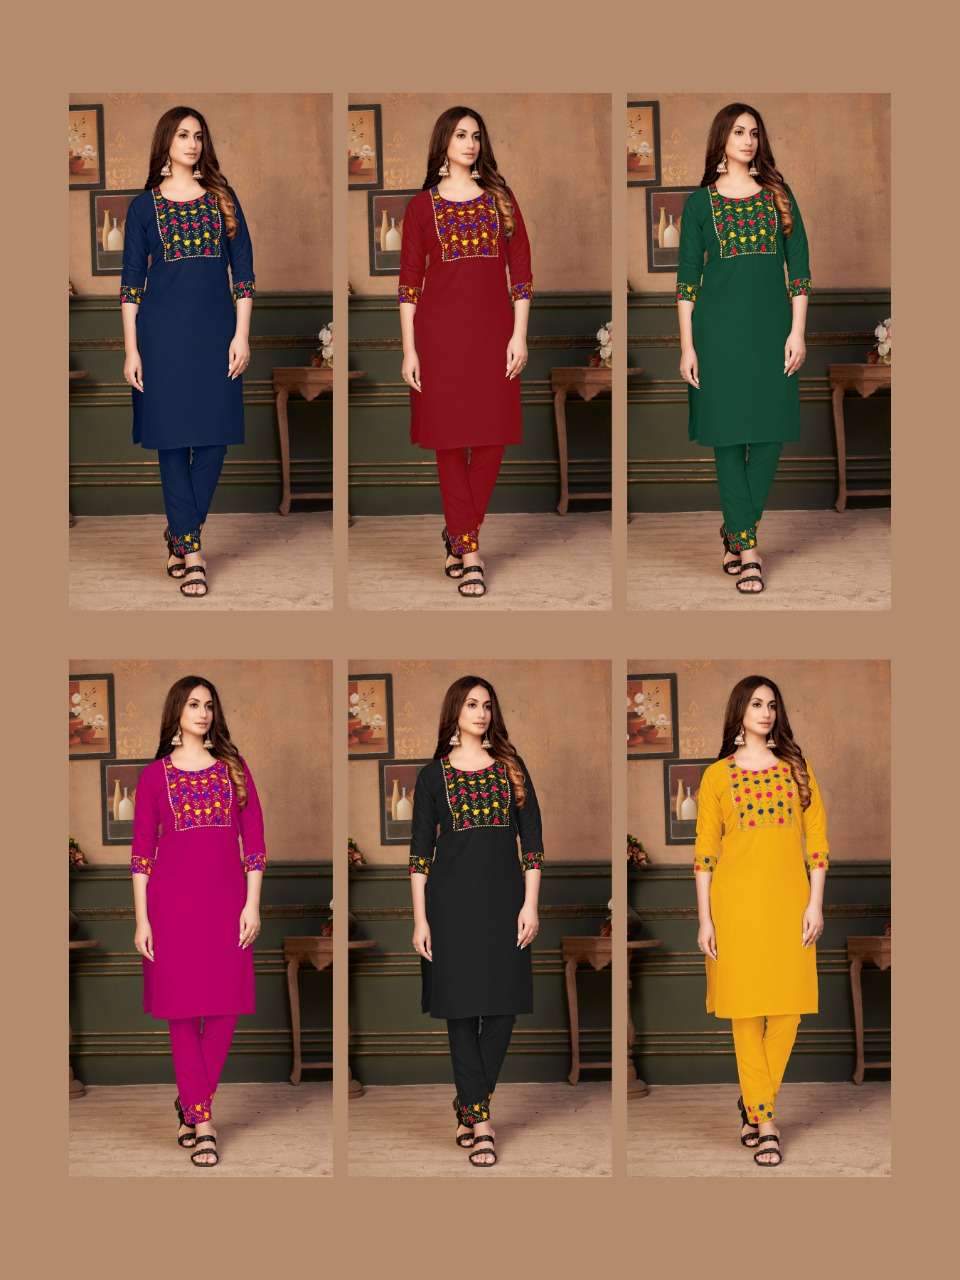 RIM ZIM BY VFF 1001 TO 1001-E SERIES DESIGNER STYLISH FANCY COLORFUL BEAUTIFUL PARTY WEAR & ETHNIC WEAR COLLECTION COTTON EMBROIDERED KURTIS AT WHOLESALE PRICE